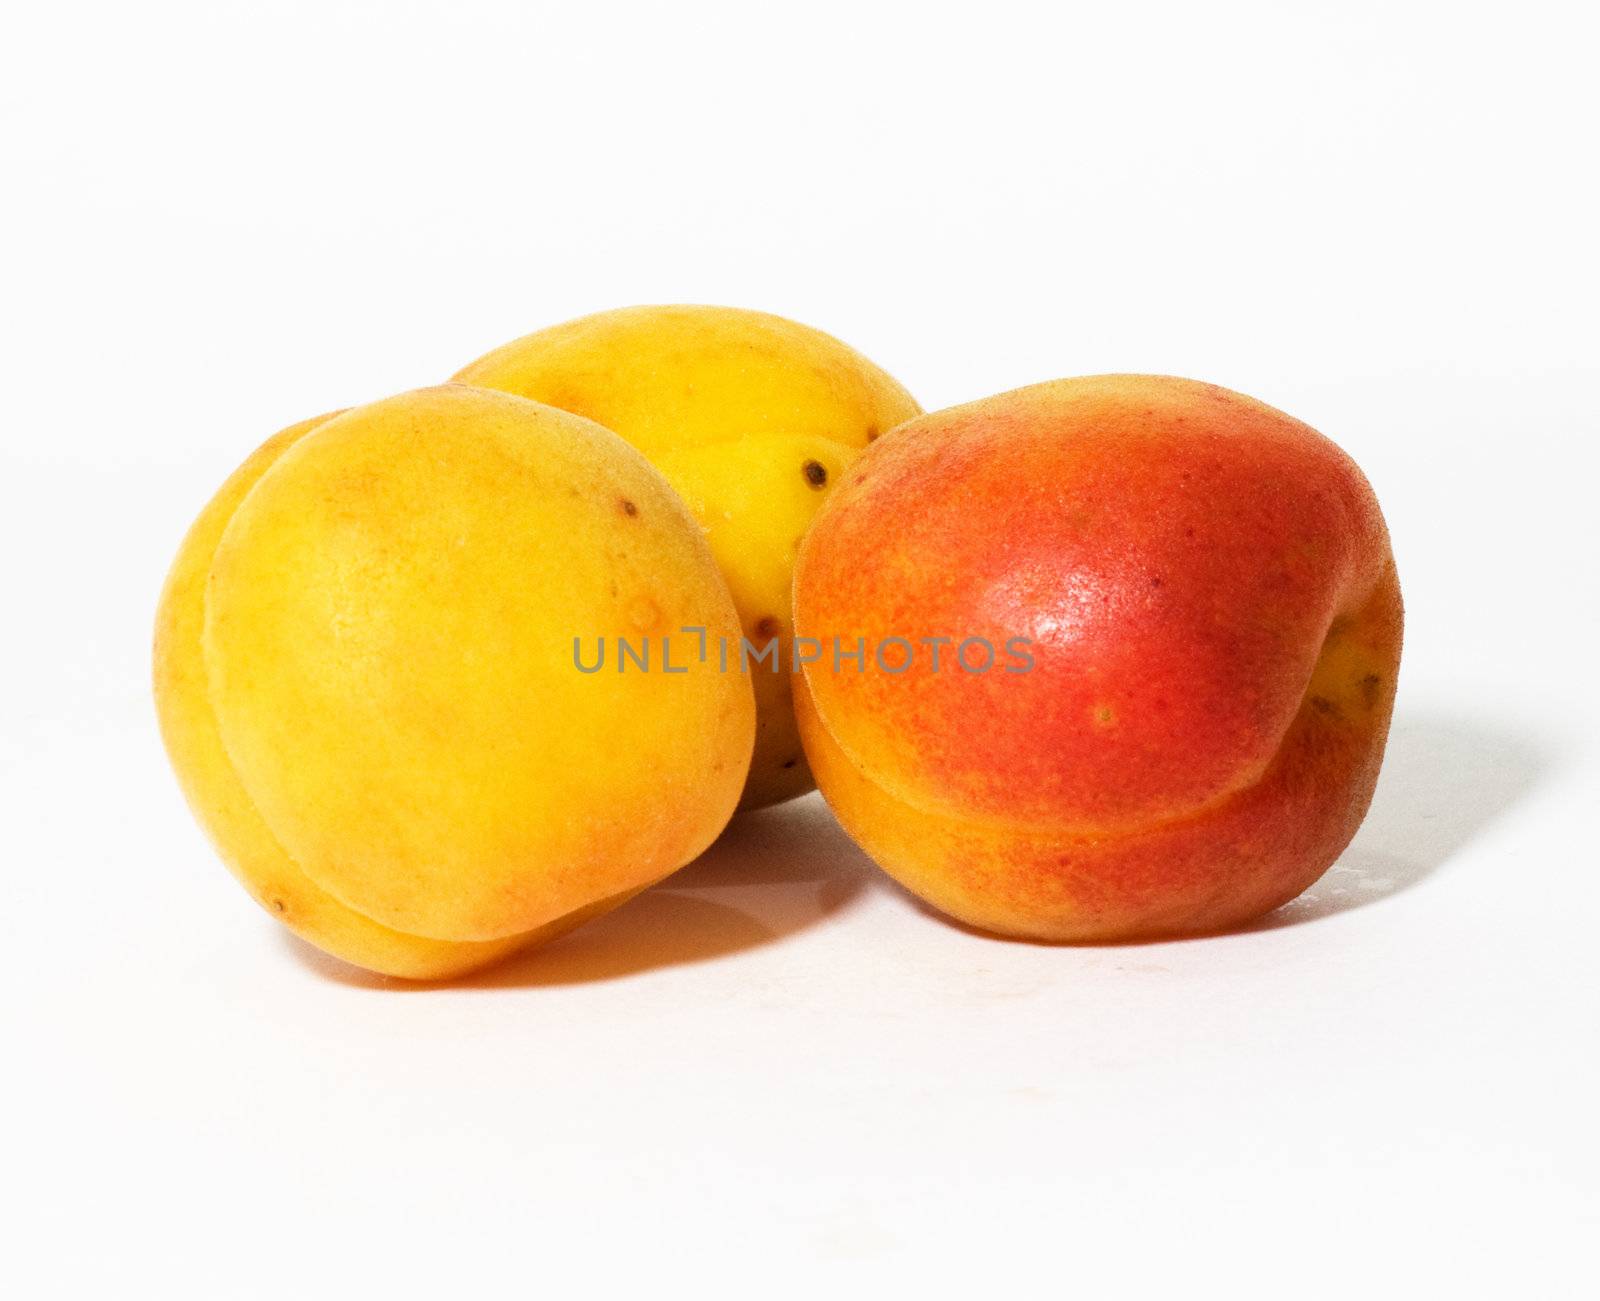 three apricot isolated on white